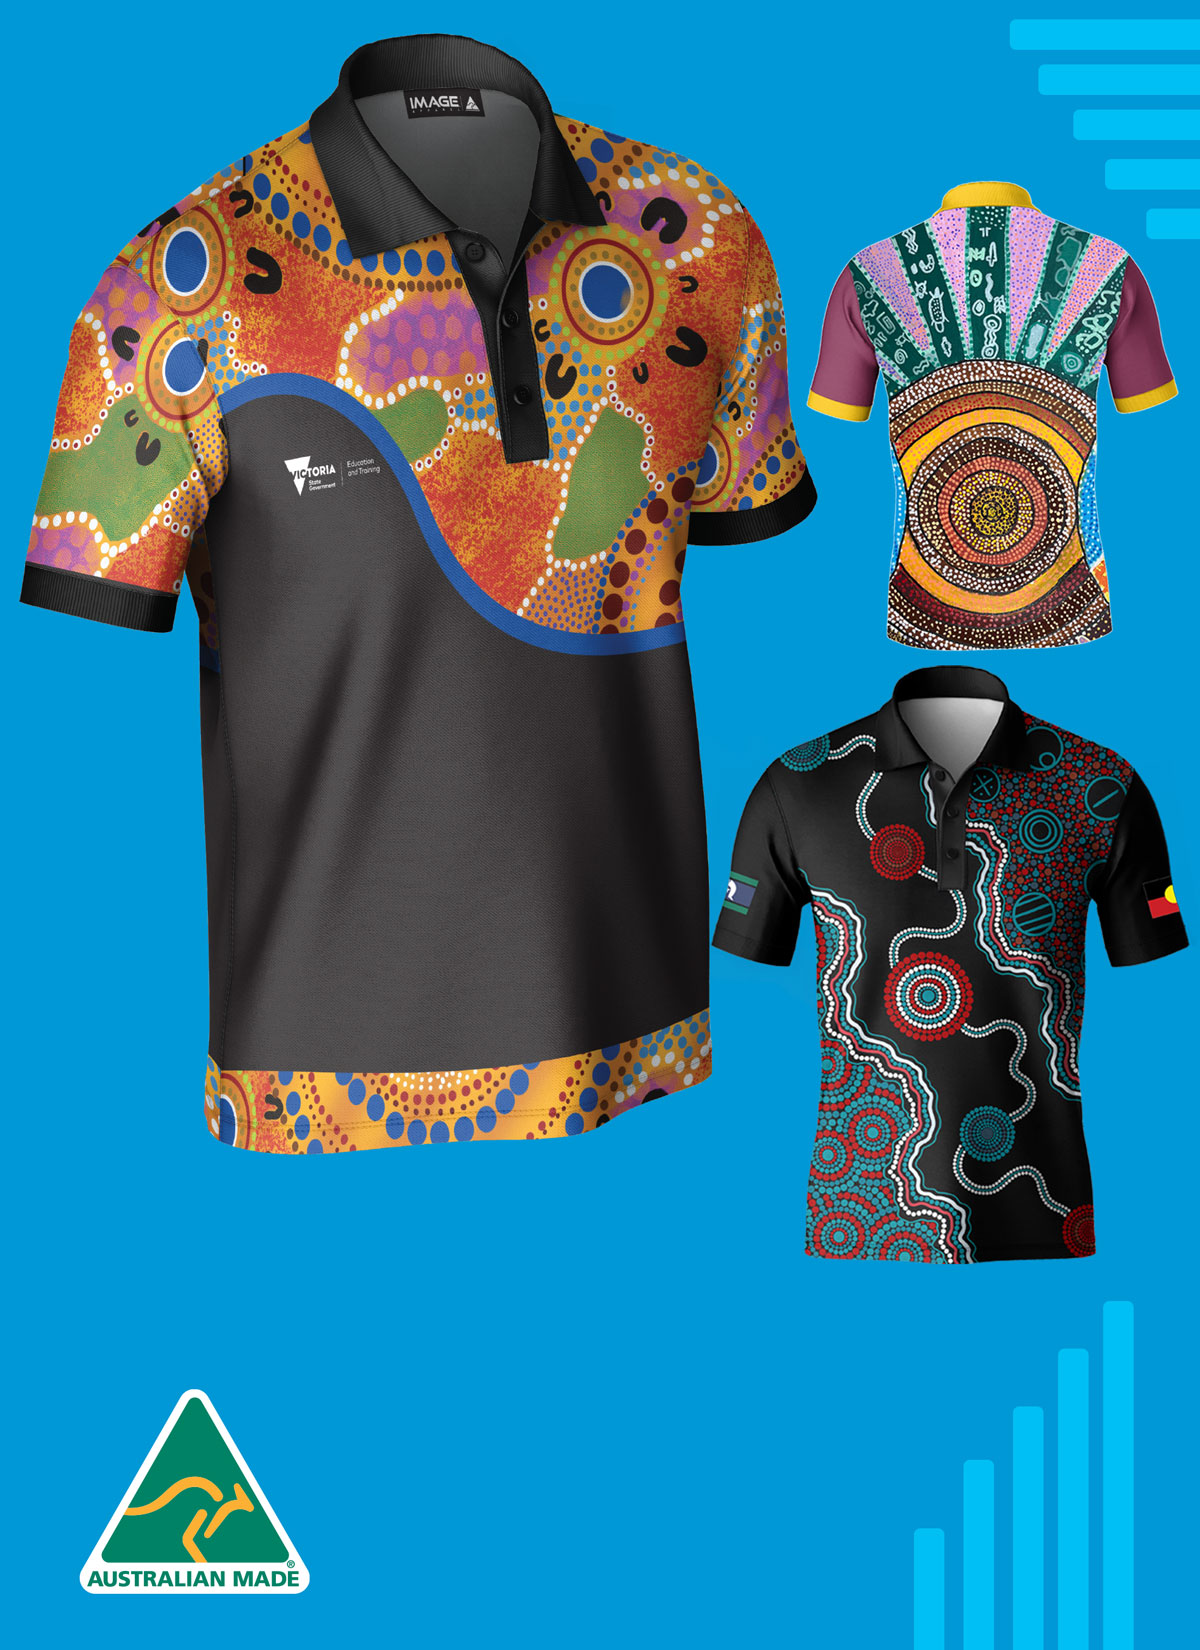 Custom All-Over Printed Polo Shirts made in Melbourne, Australia